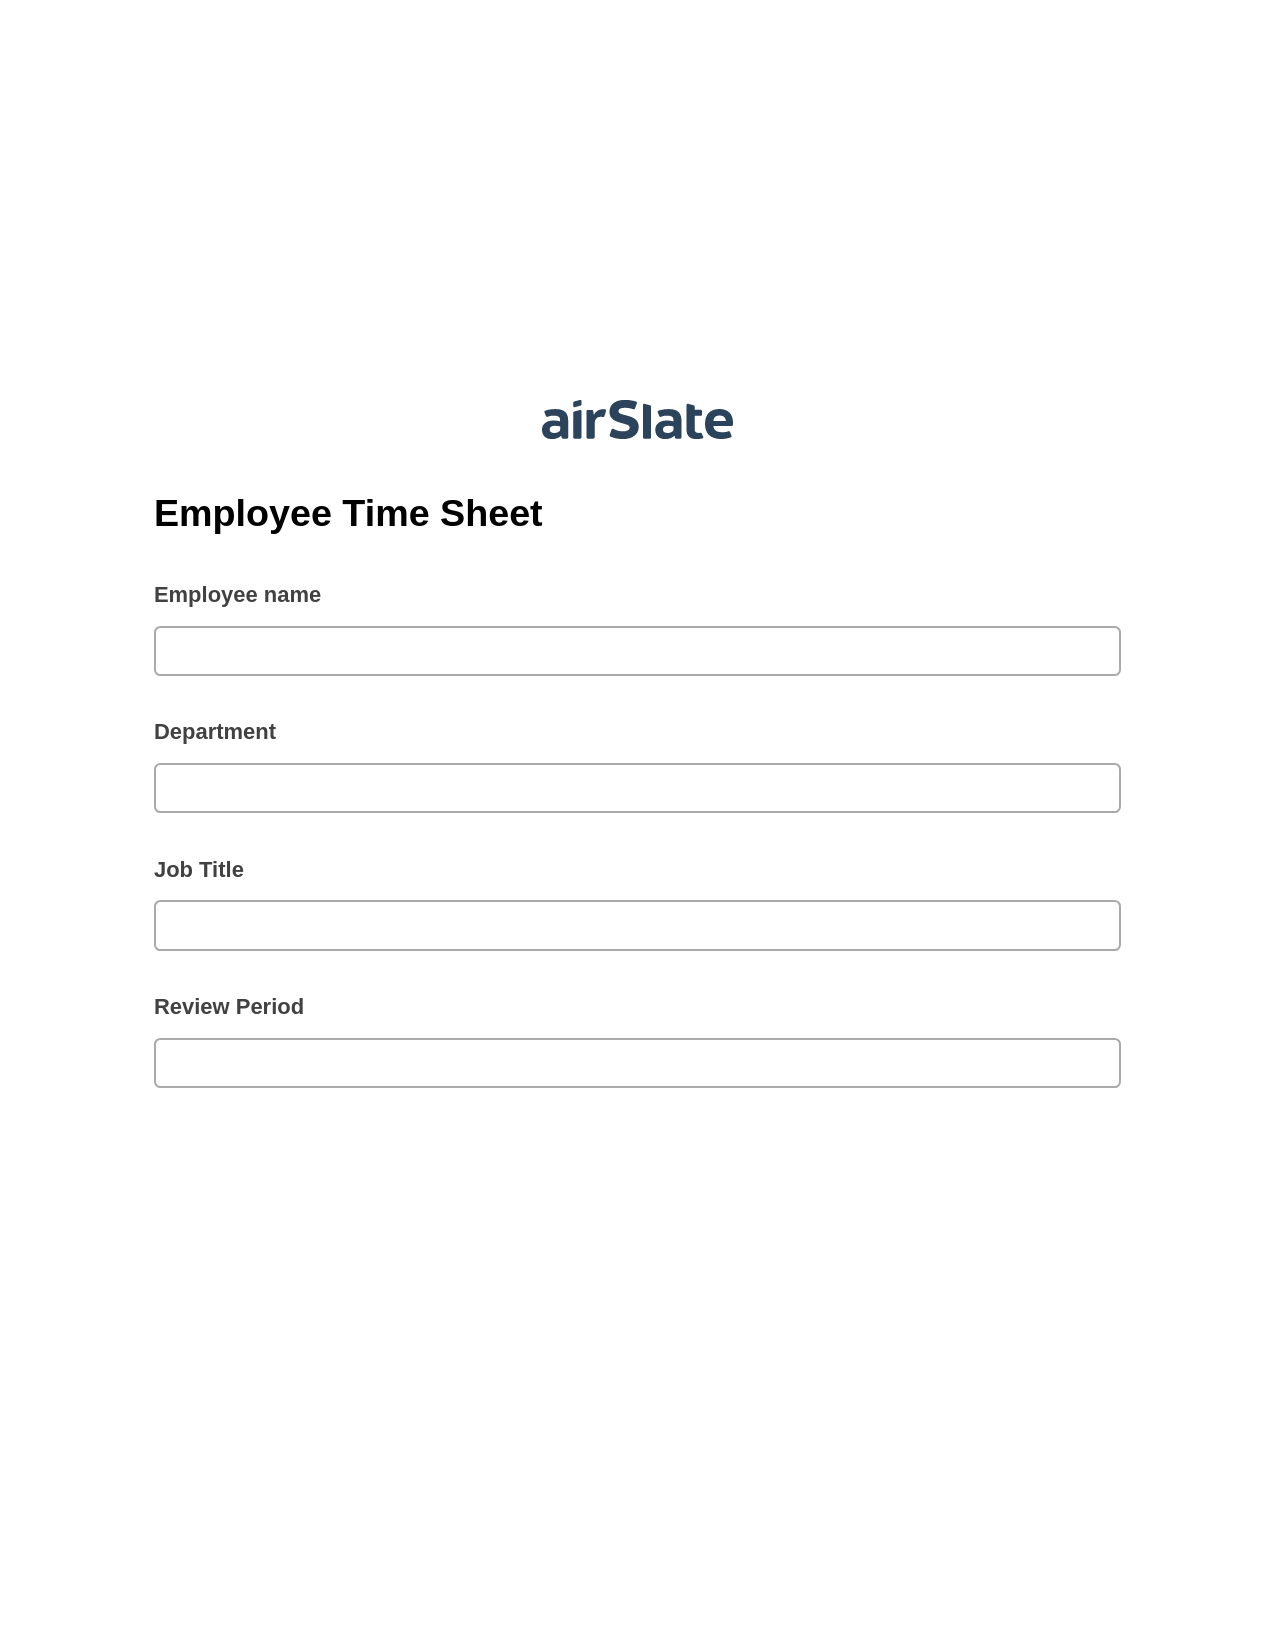 Multirole Employee Time Sheet Pre-fill from AirTable Bot, Create slate addon, Archive to Box Bot